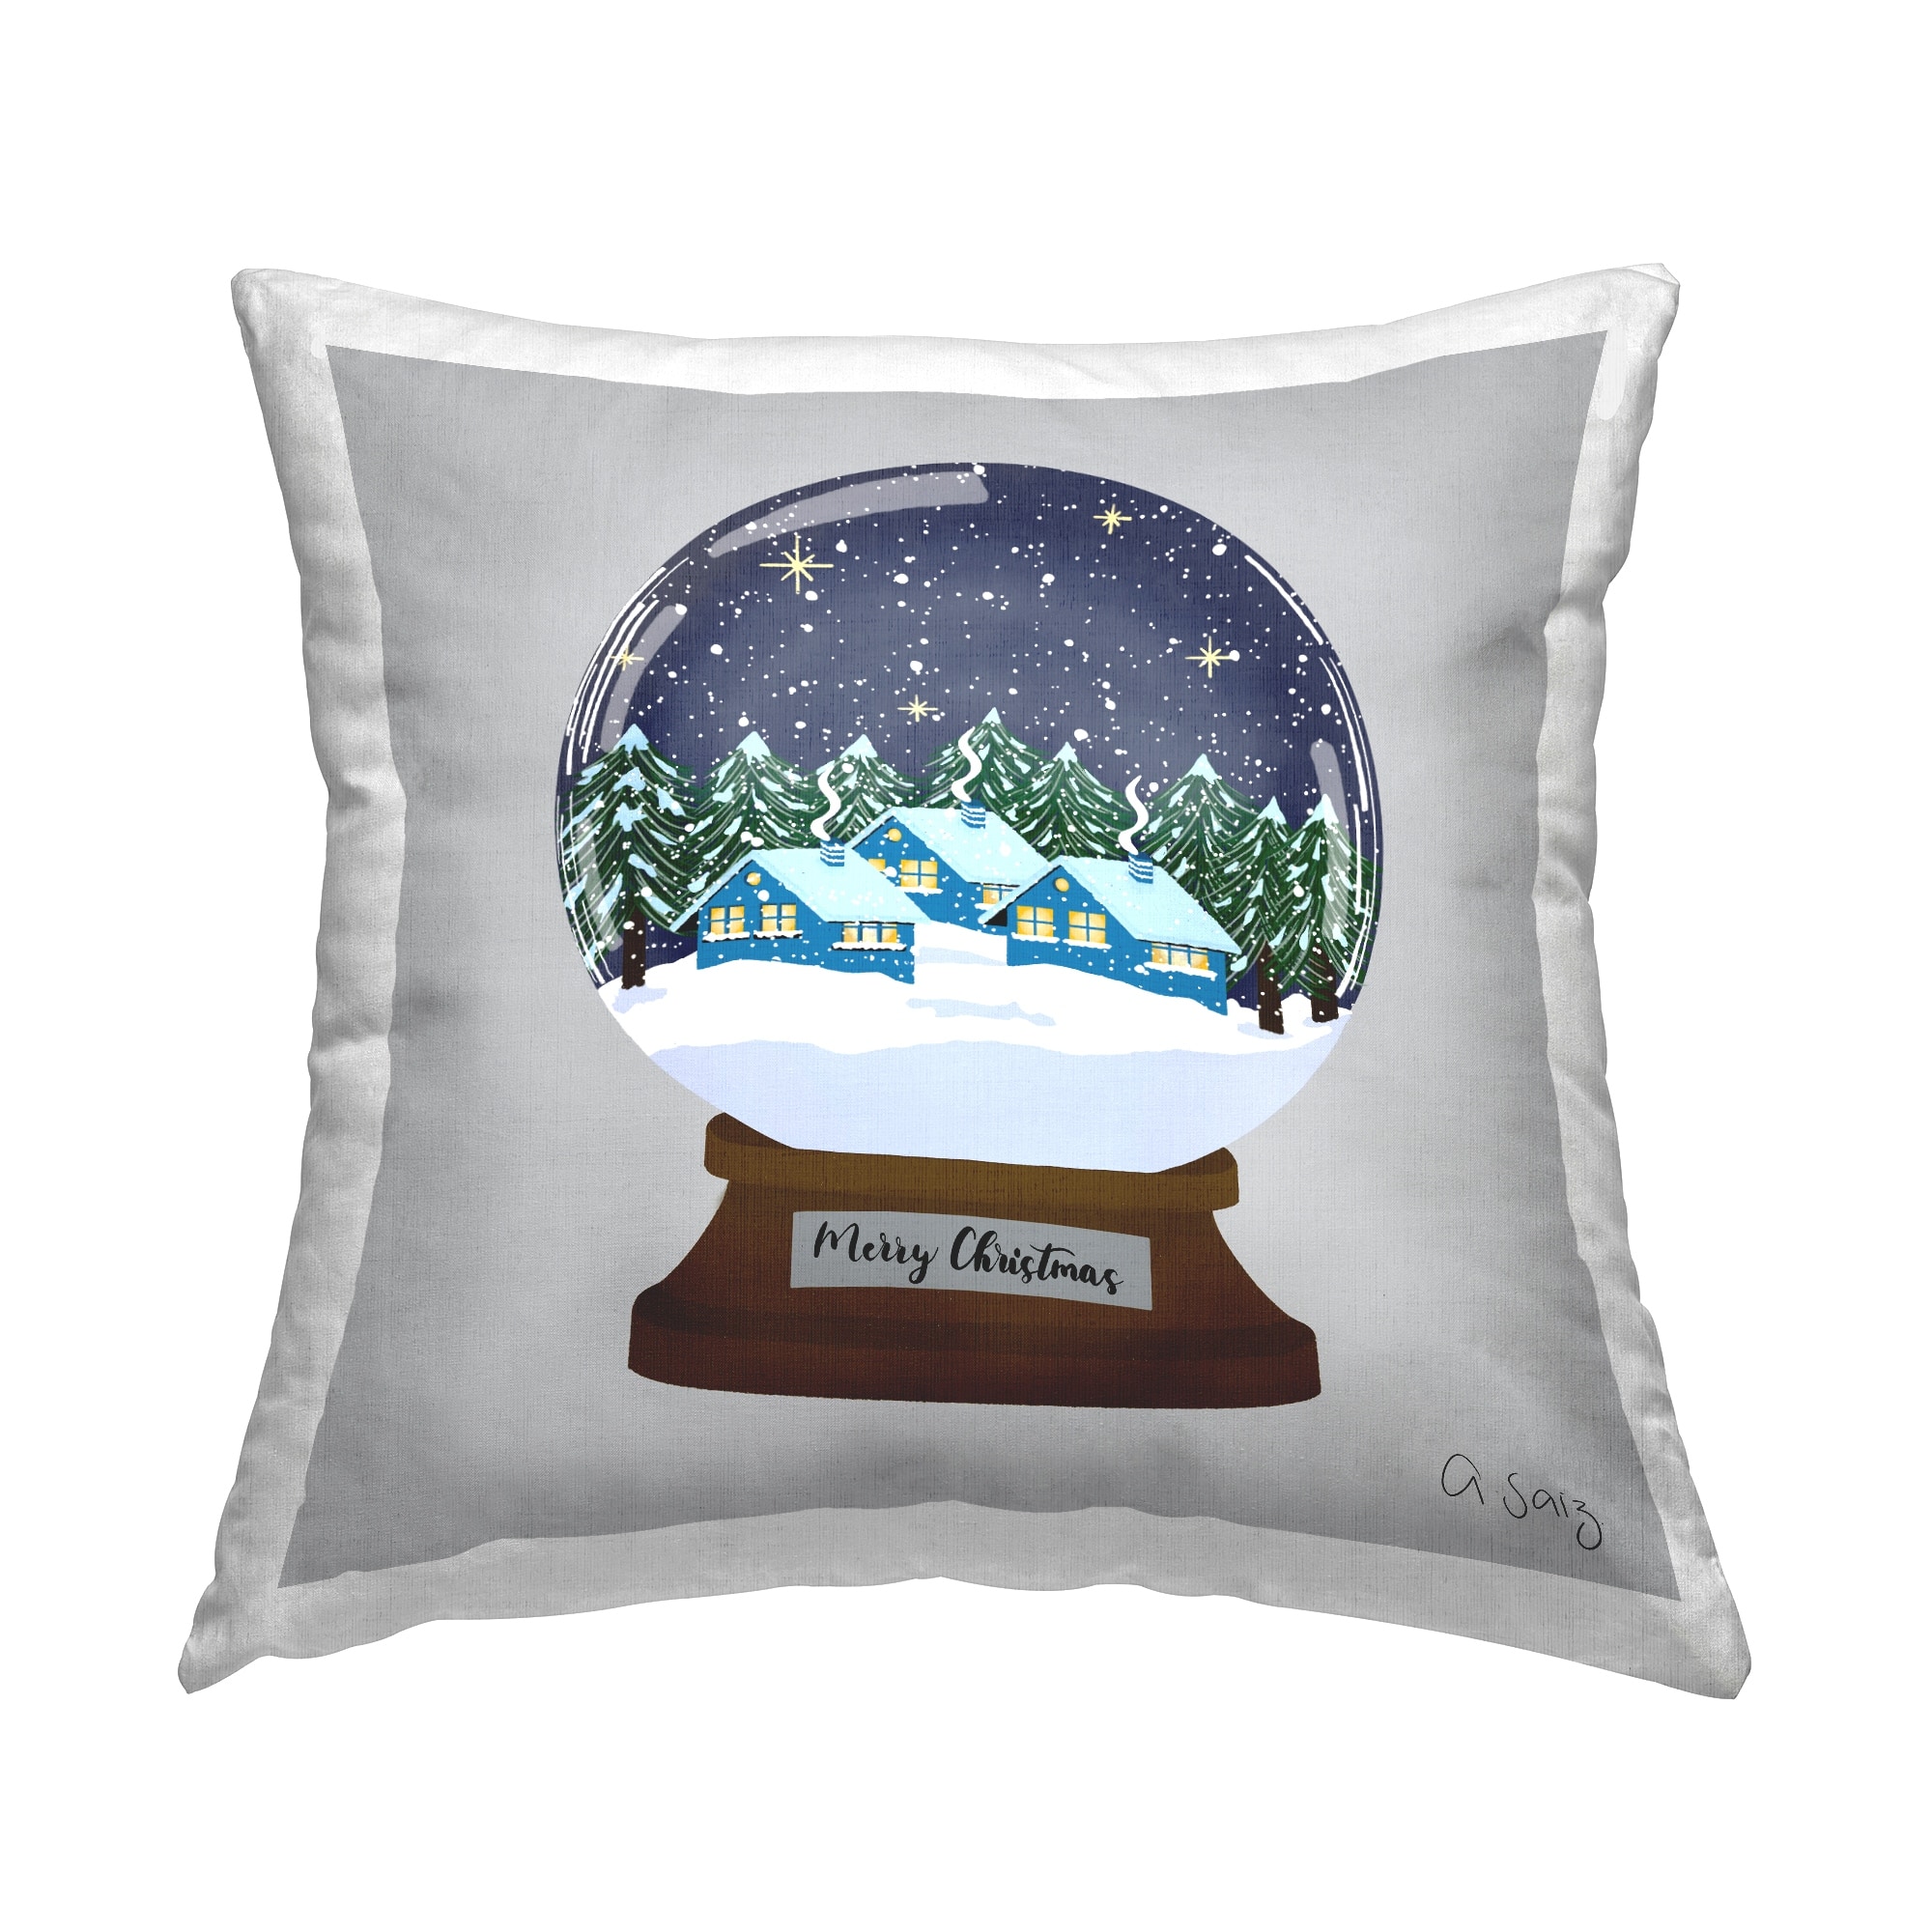 Stupell Merry Christmas Night Sky Printed Throw Pillow Design By Ale 